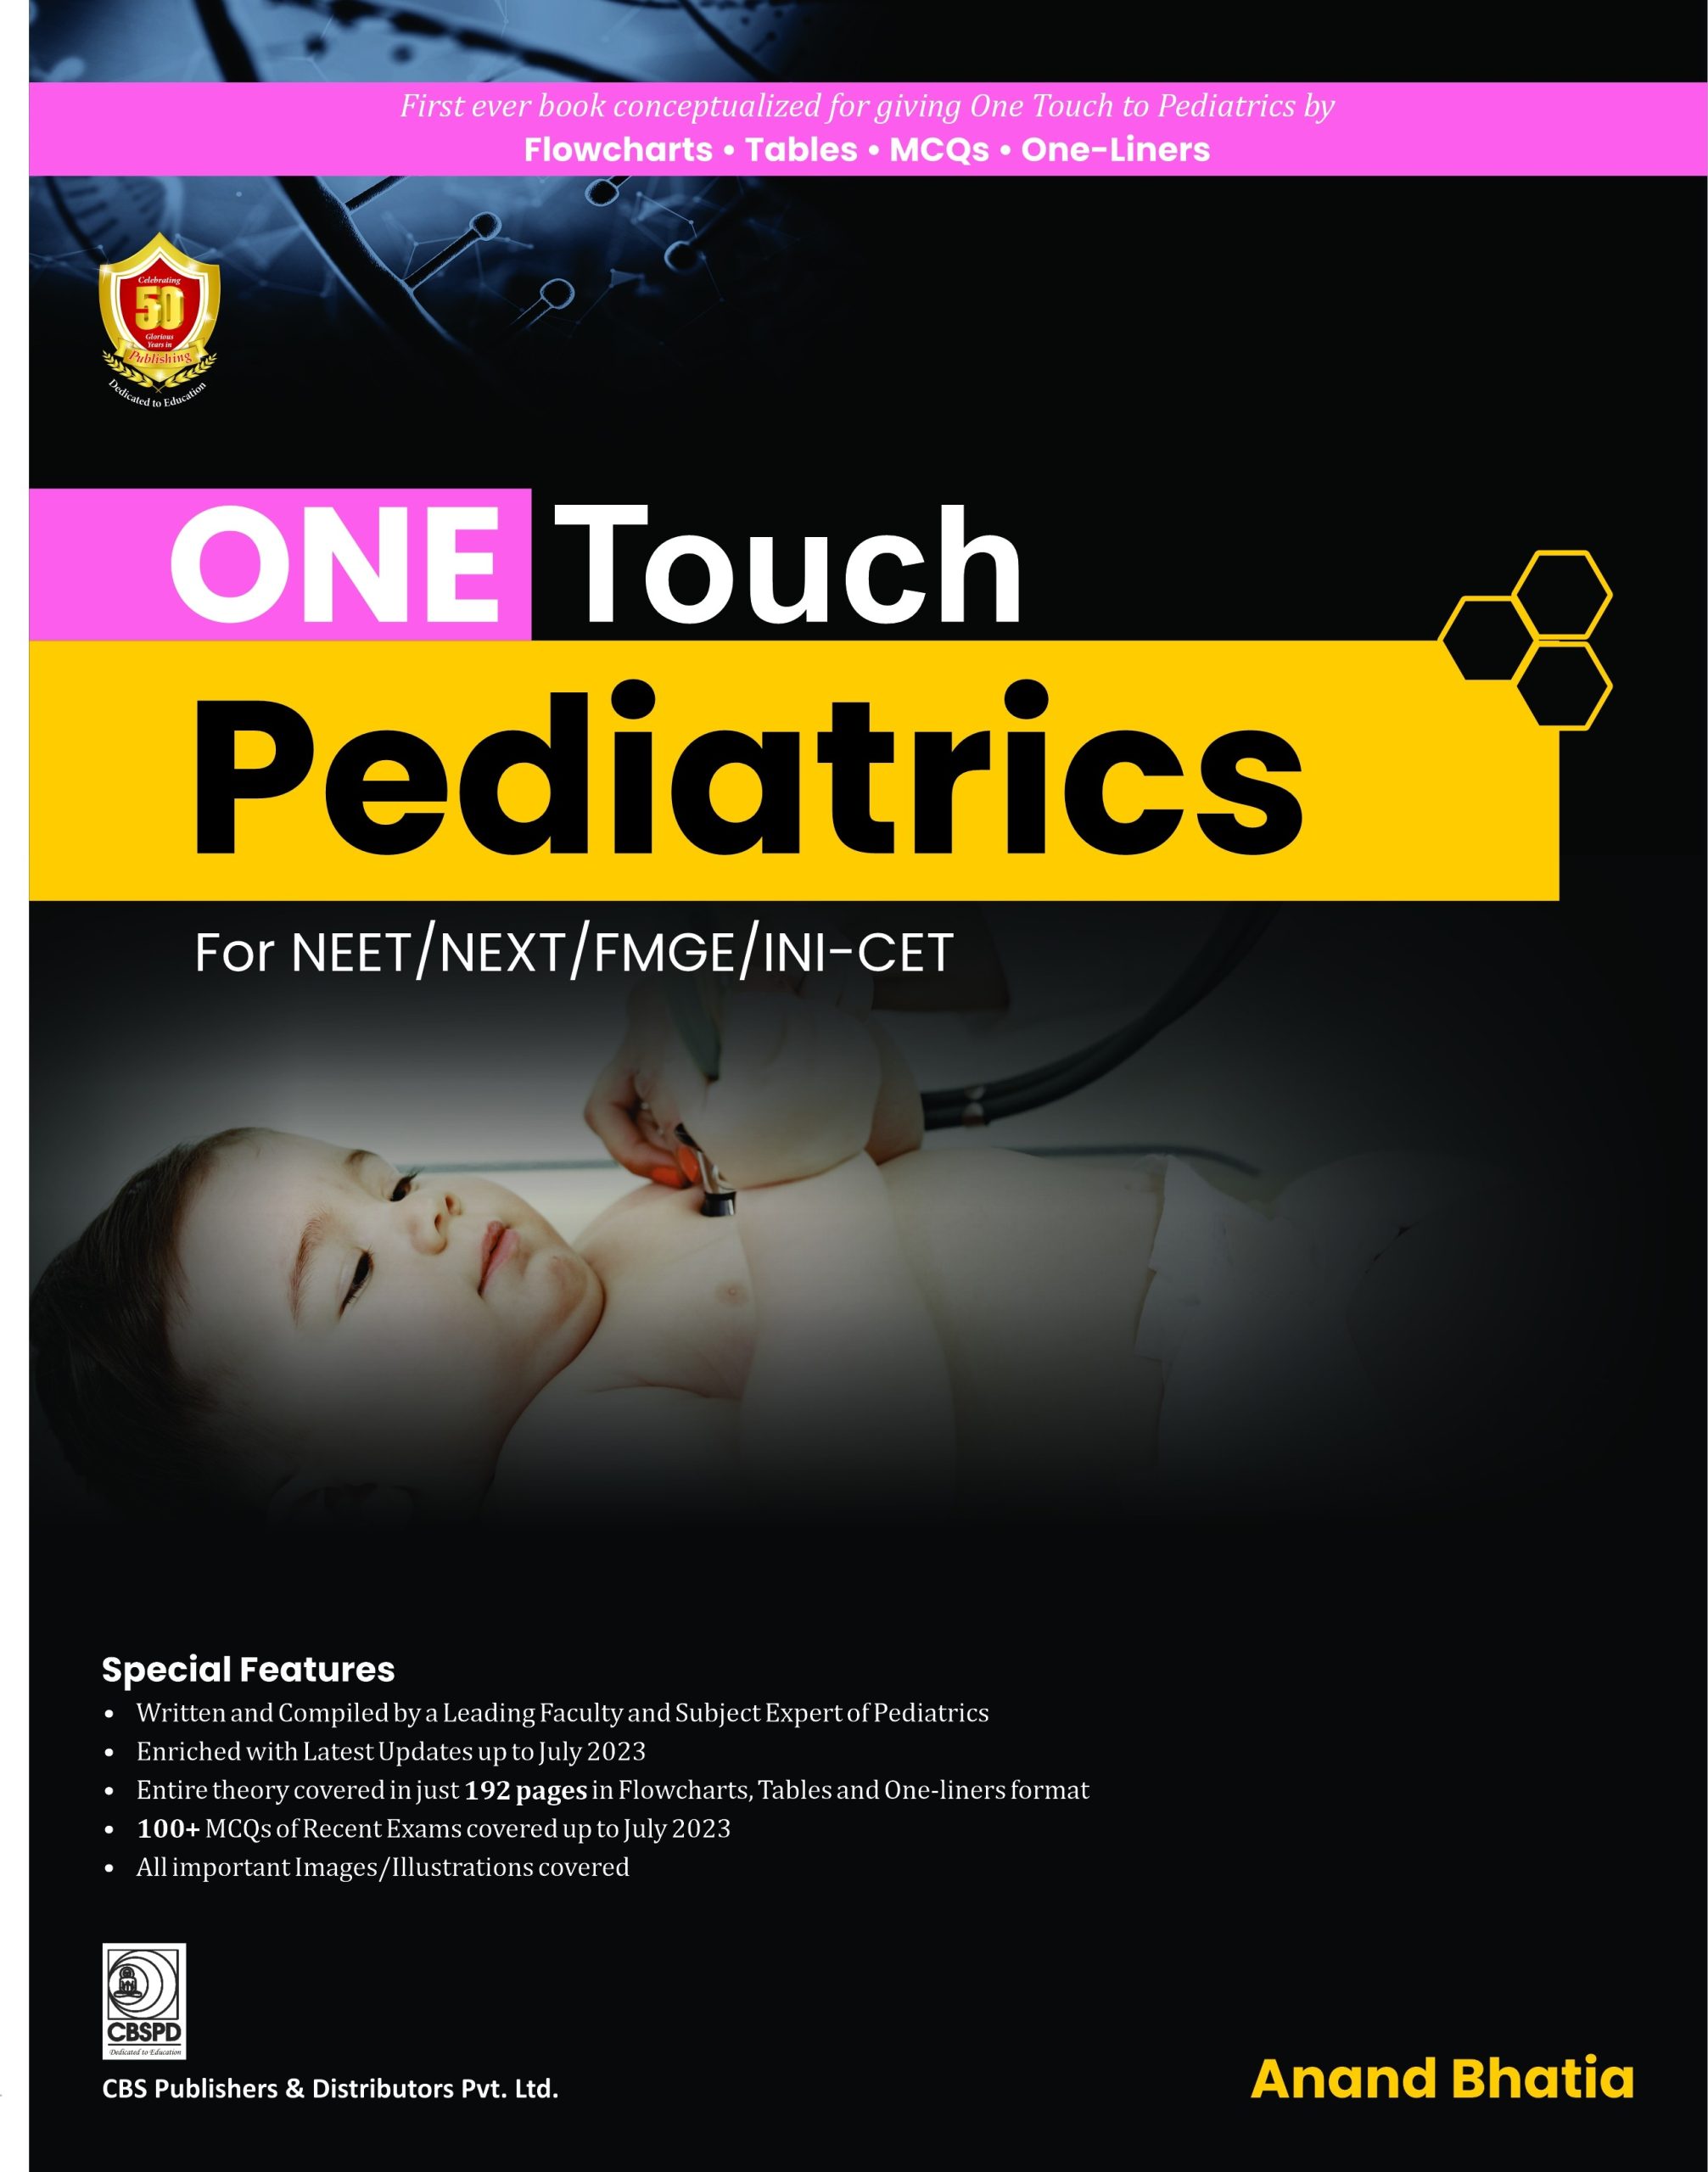 ONE TOUCH Pediatrics for NEET/NEXT/FMGE/INI-CET by Dr Anand Bhatia